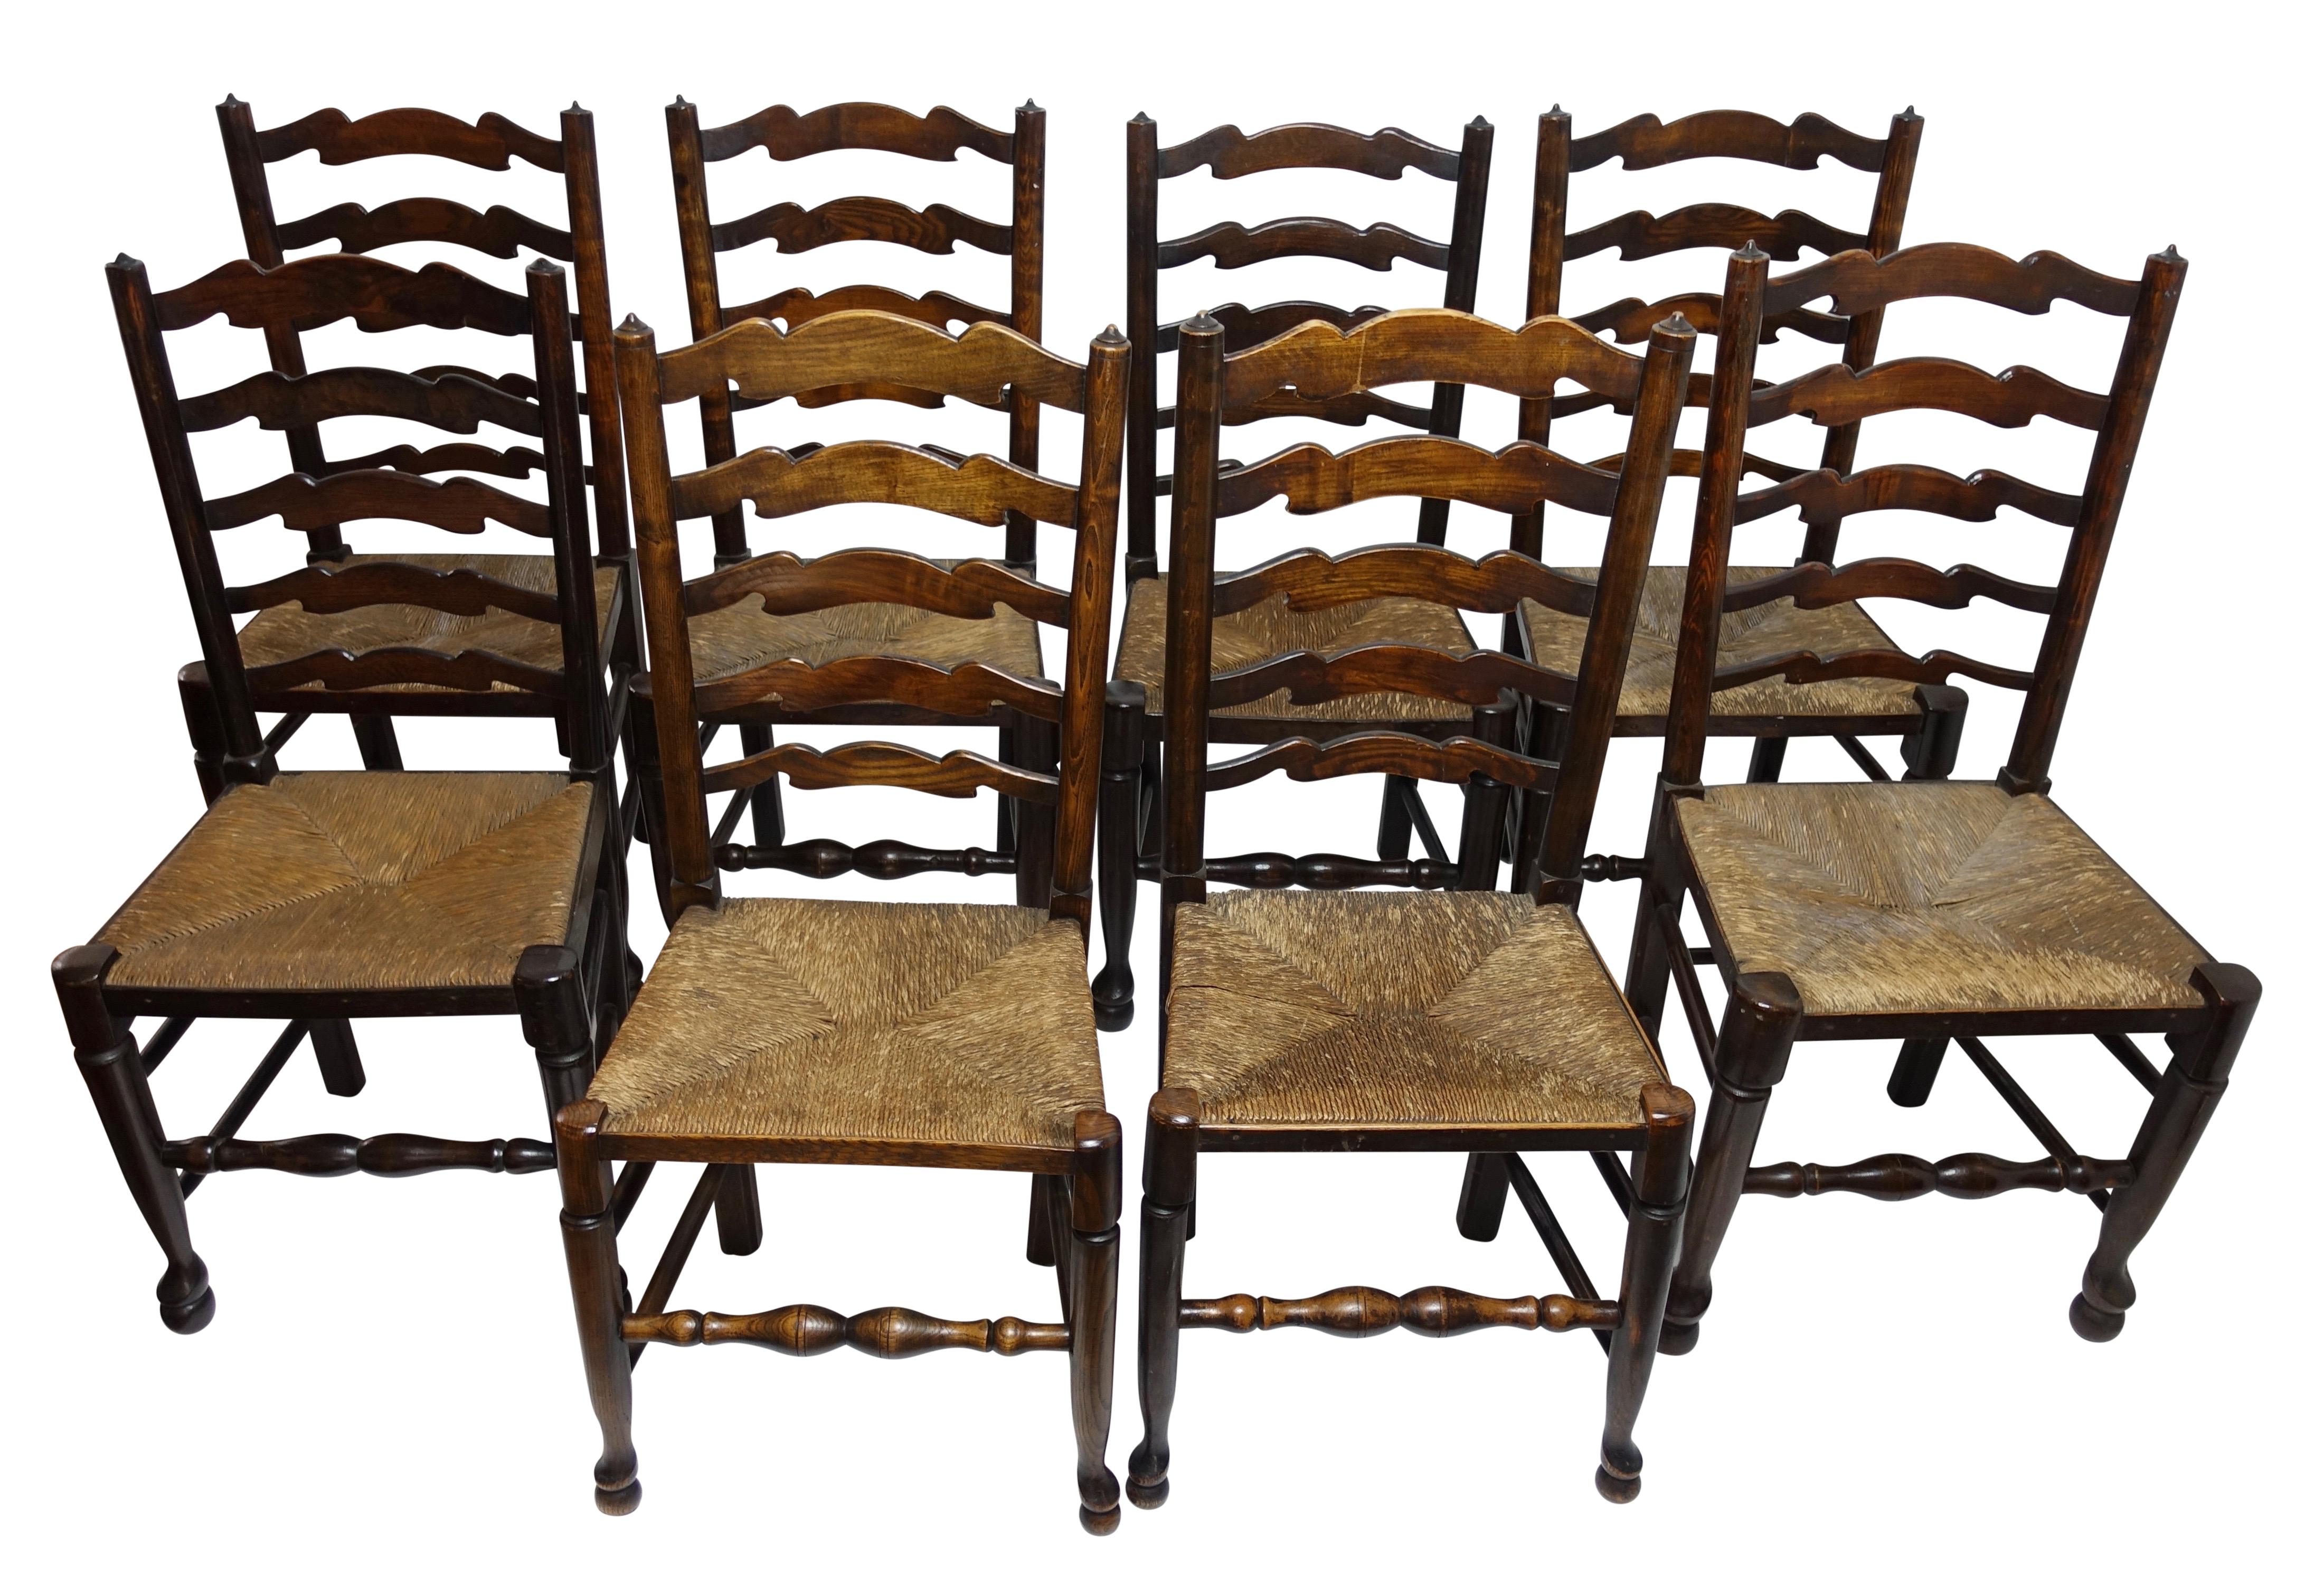 A very nice set of eight traditional style English Lancashire ladder back dining chairs with original rush seats. Hand crafted, sturdy, and with generous size seats. England, early 20th century.
There are six exact matches and two that have